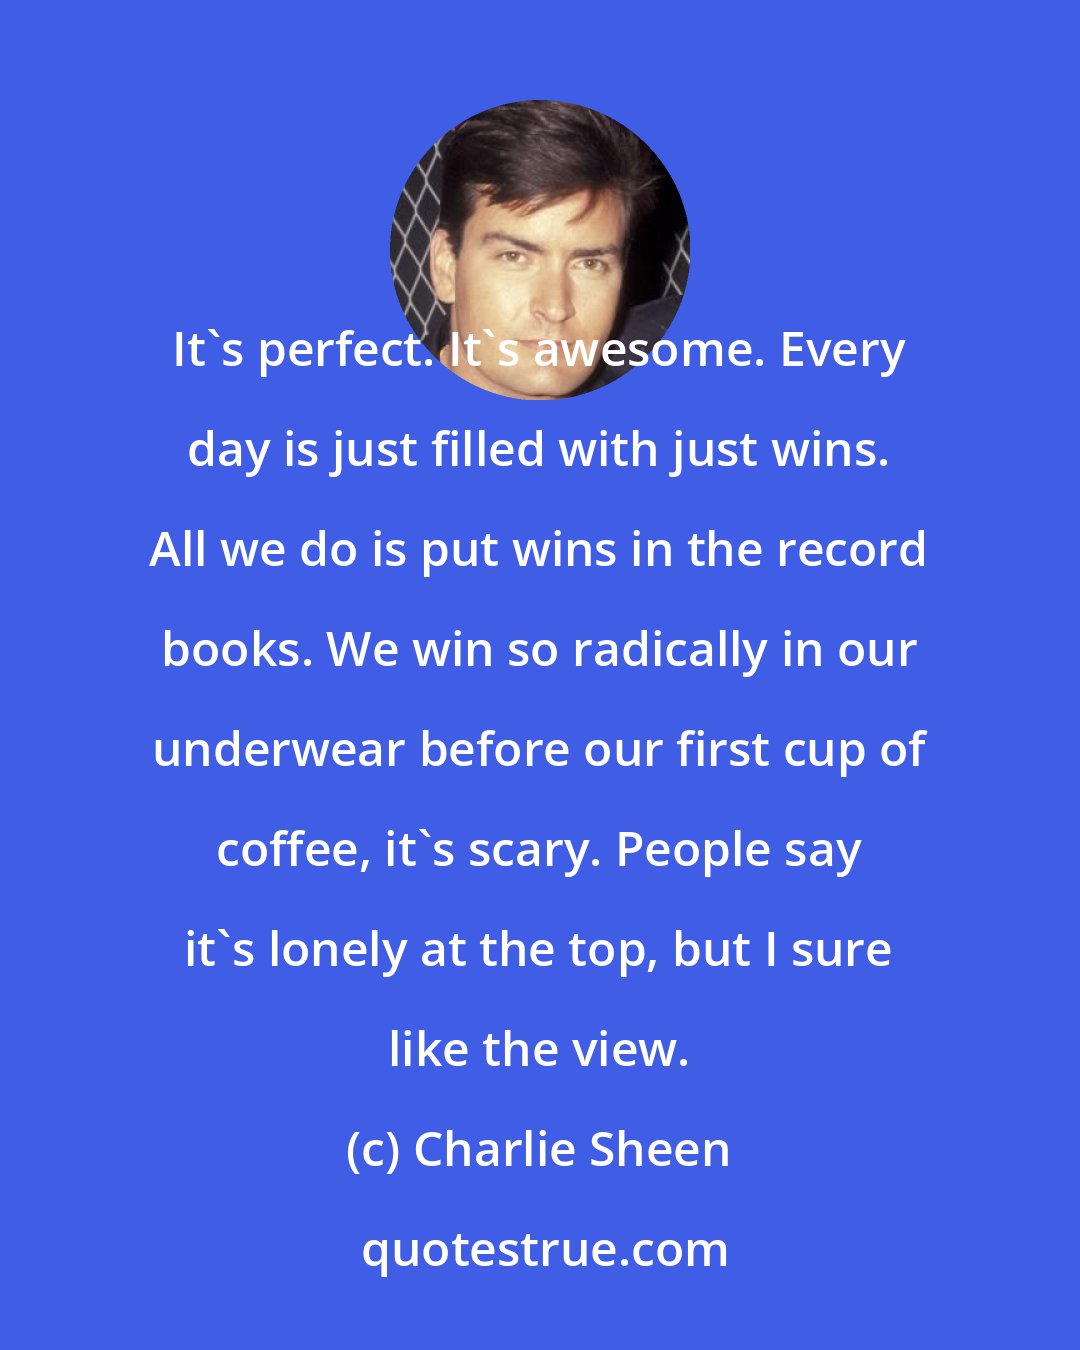 Charlie Sheen: It's perfect. It's awesome. Every day is just filled with just wins. All we do is put wins in the record books. We win so radically in our underwear before our first cup of coffee, it's scary. People say it's lonely at the top, but I sure like the view.